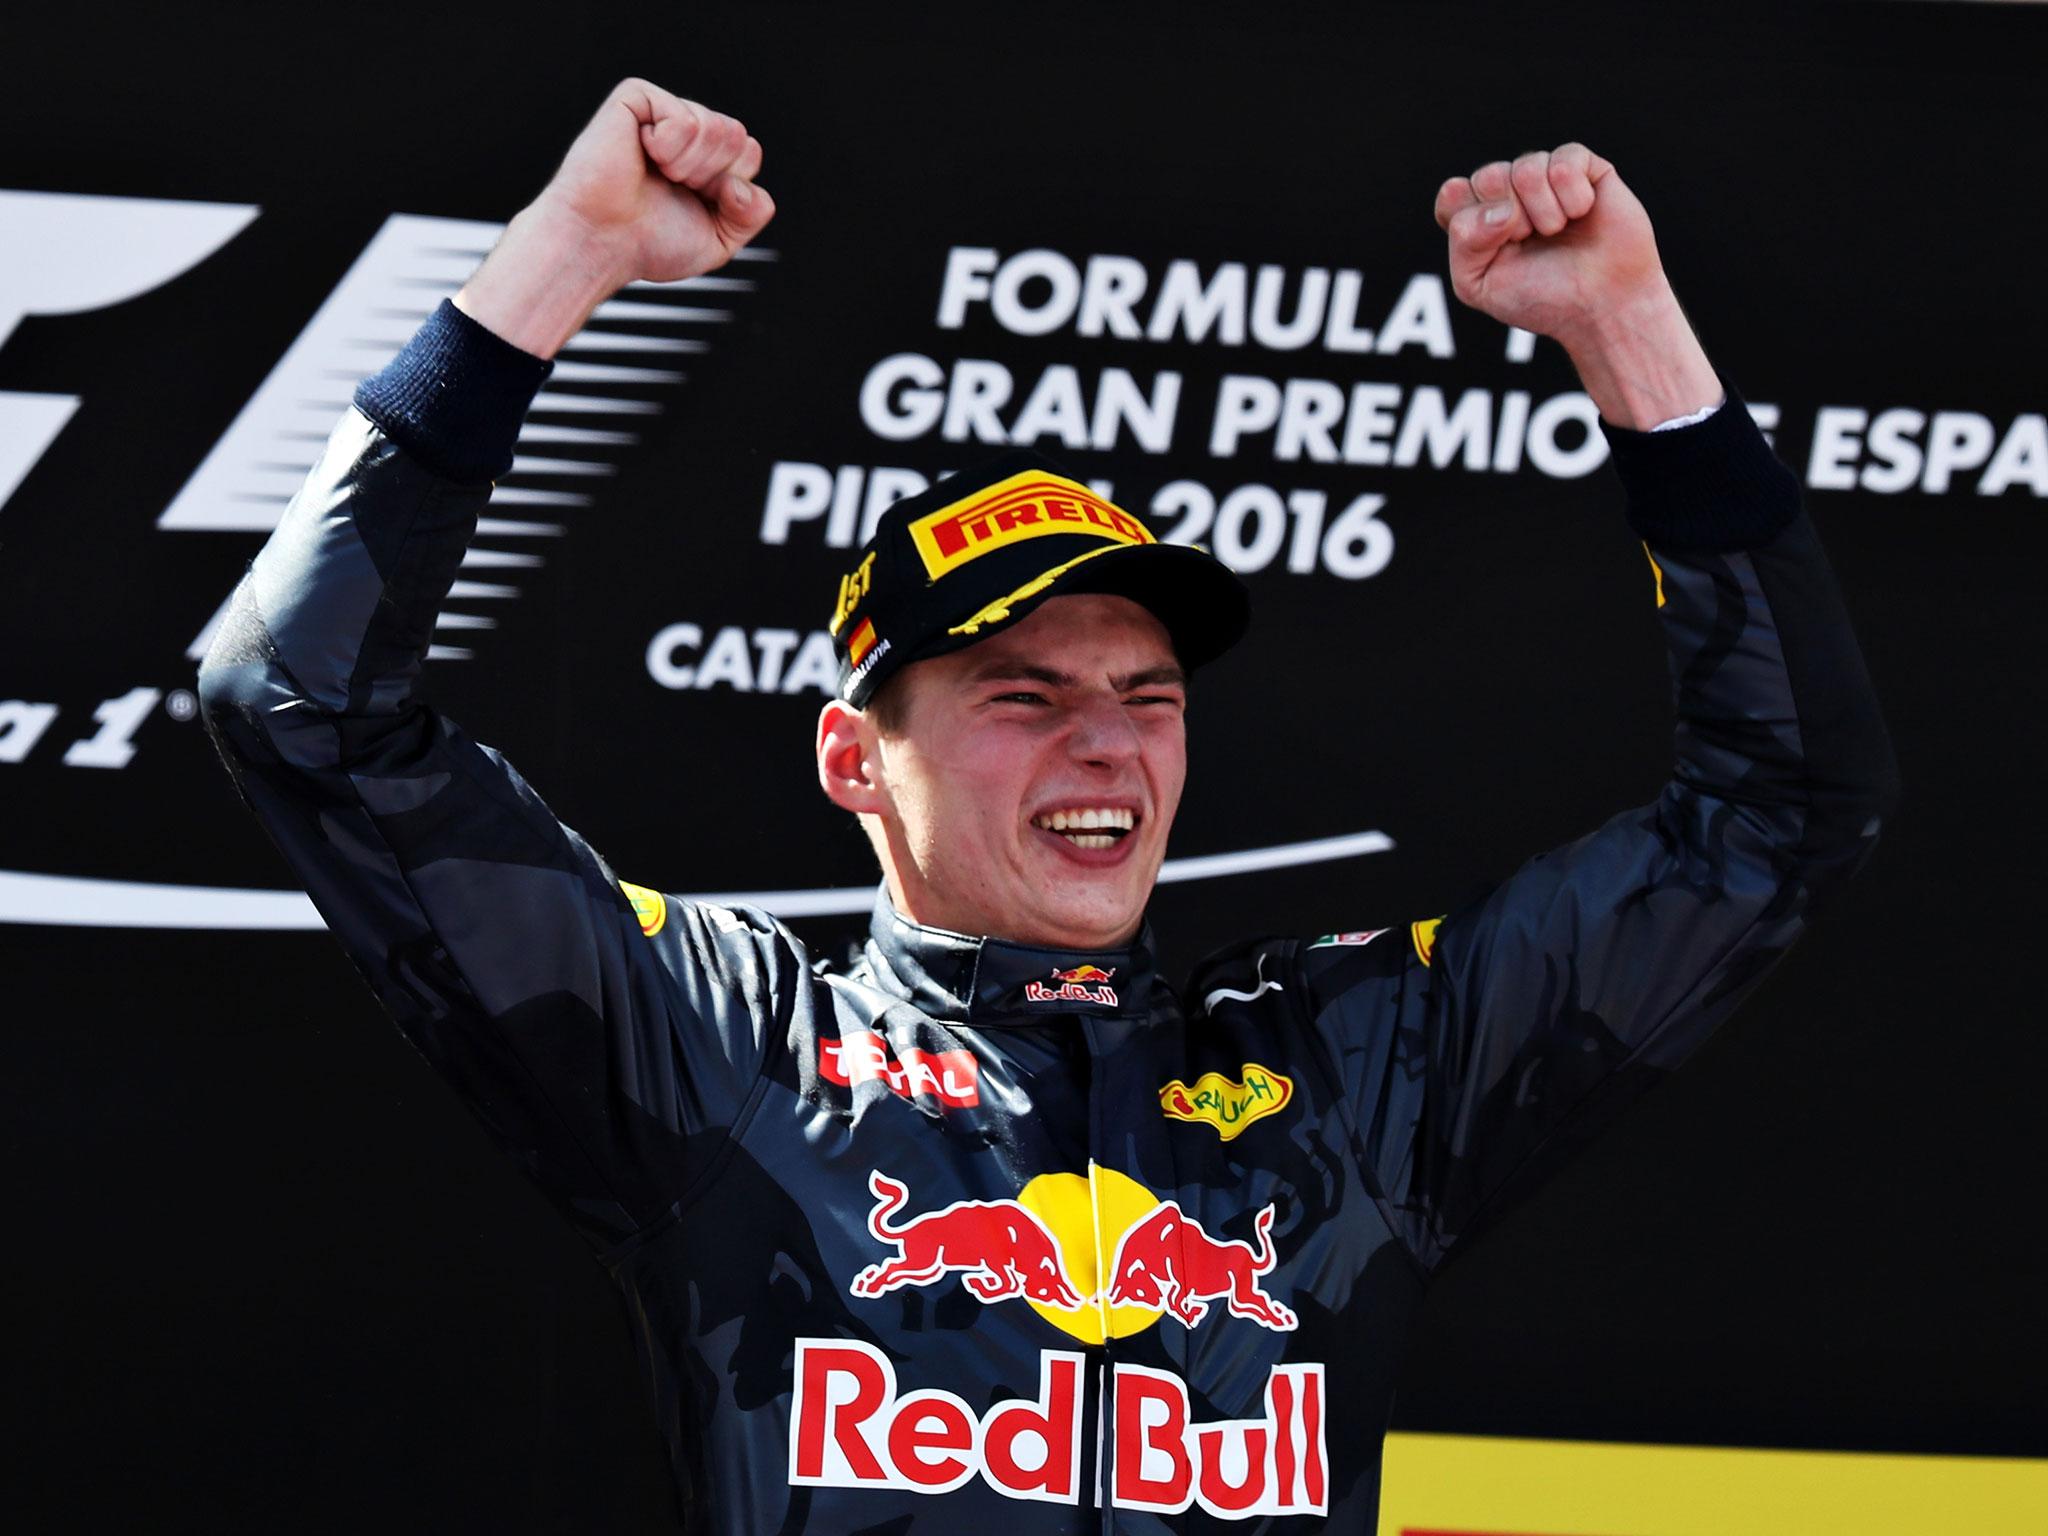 Verstappen is highly-rated but has struggled with retirements this season